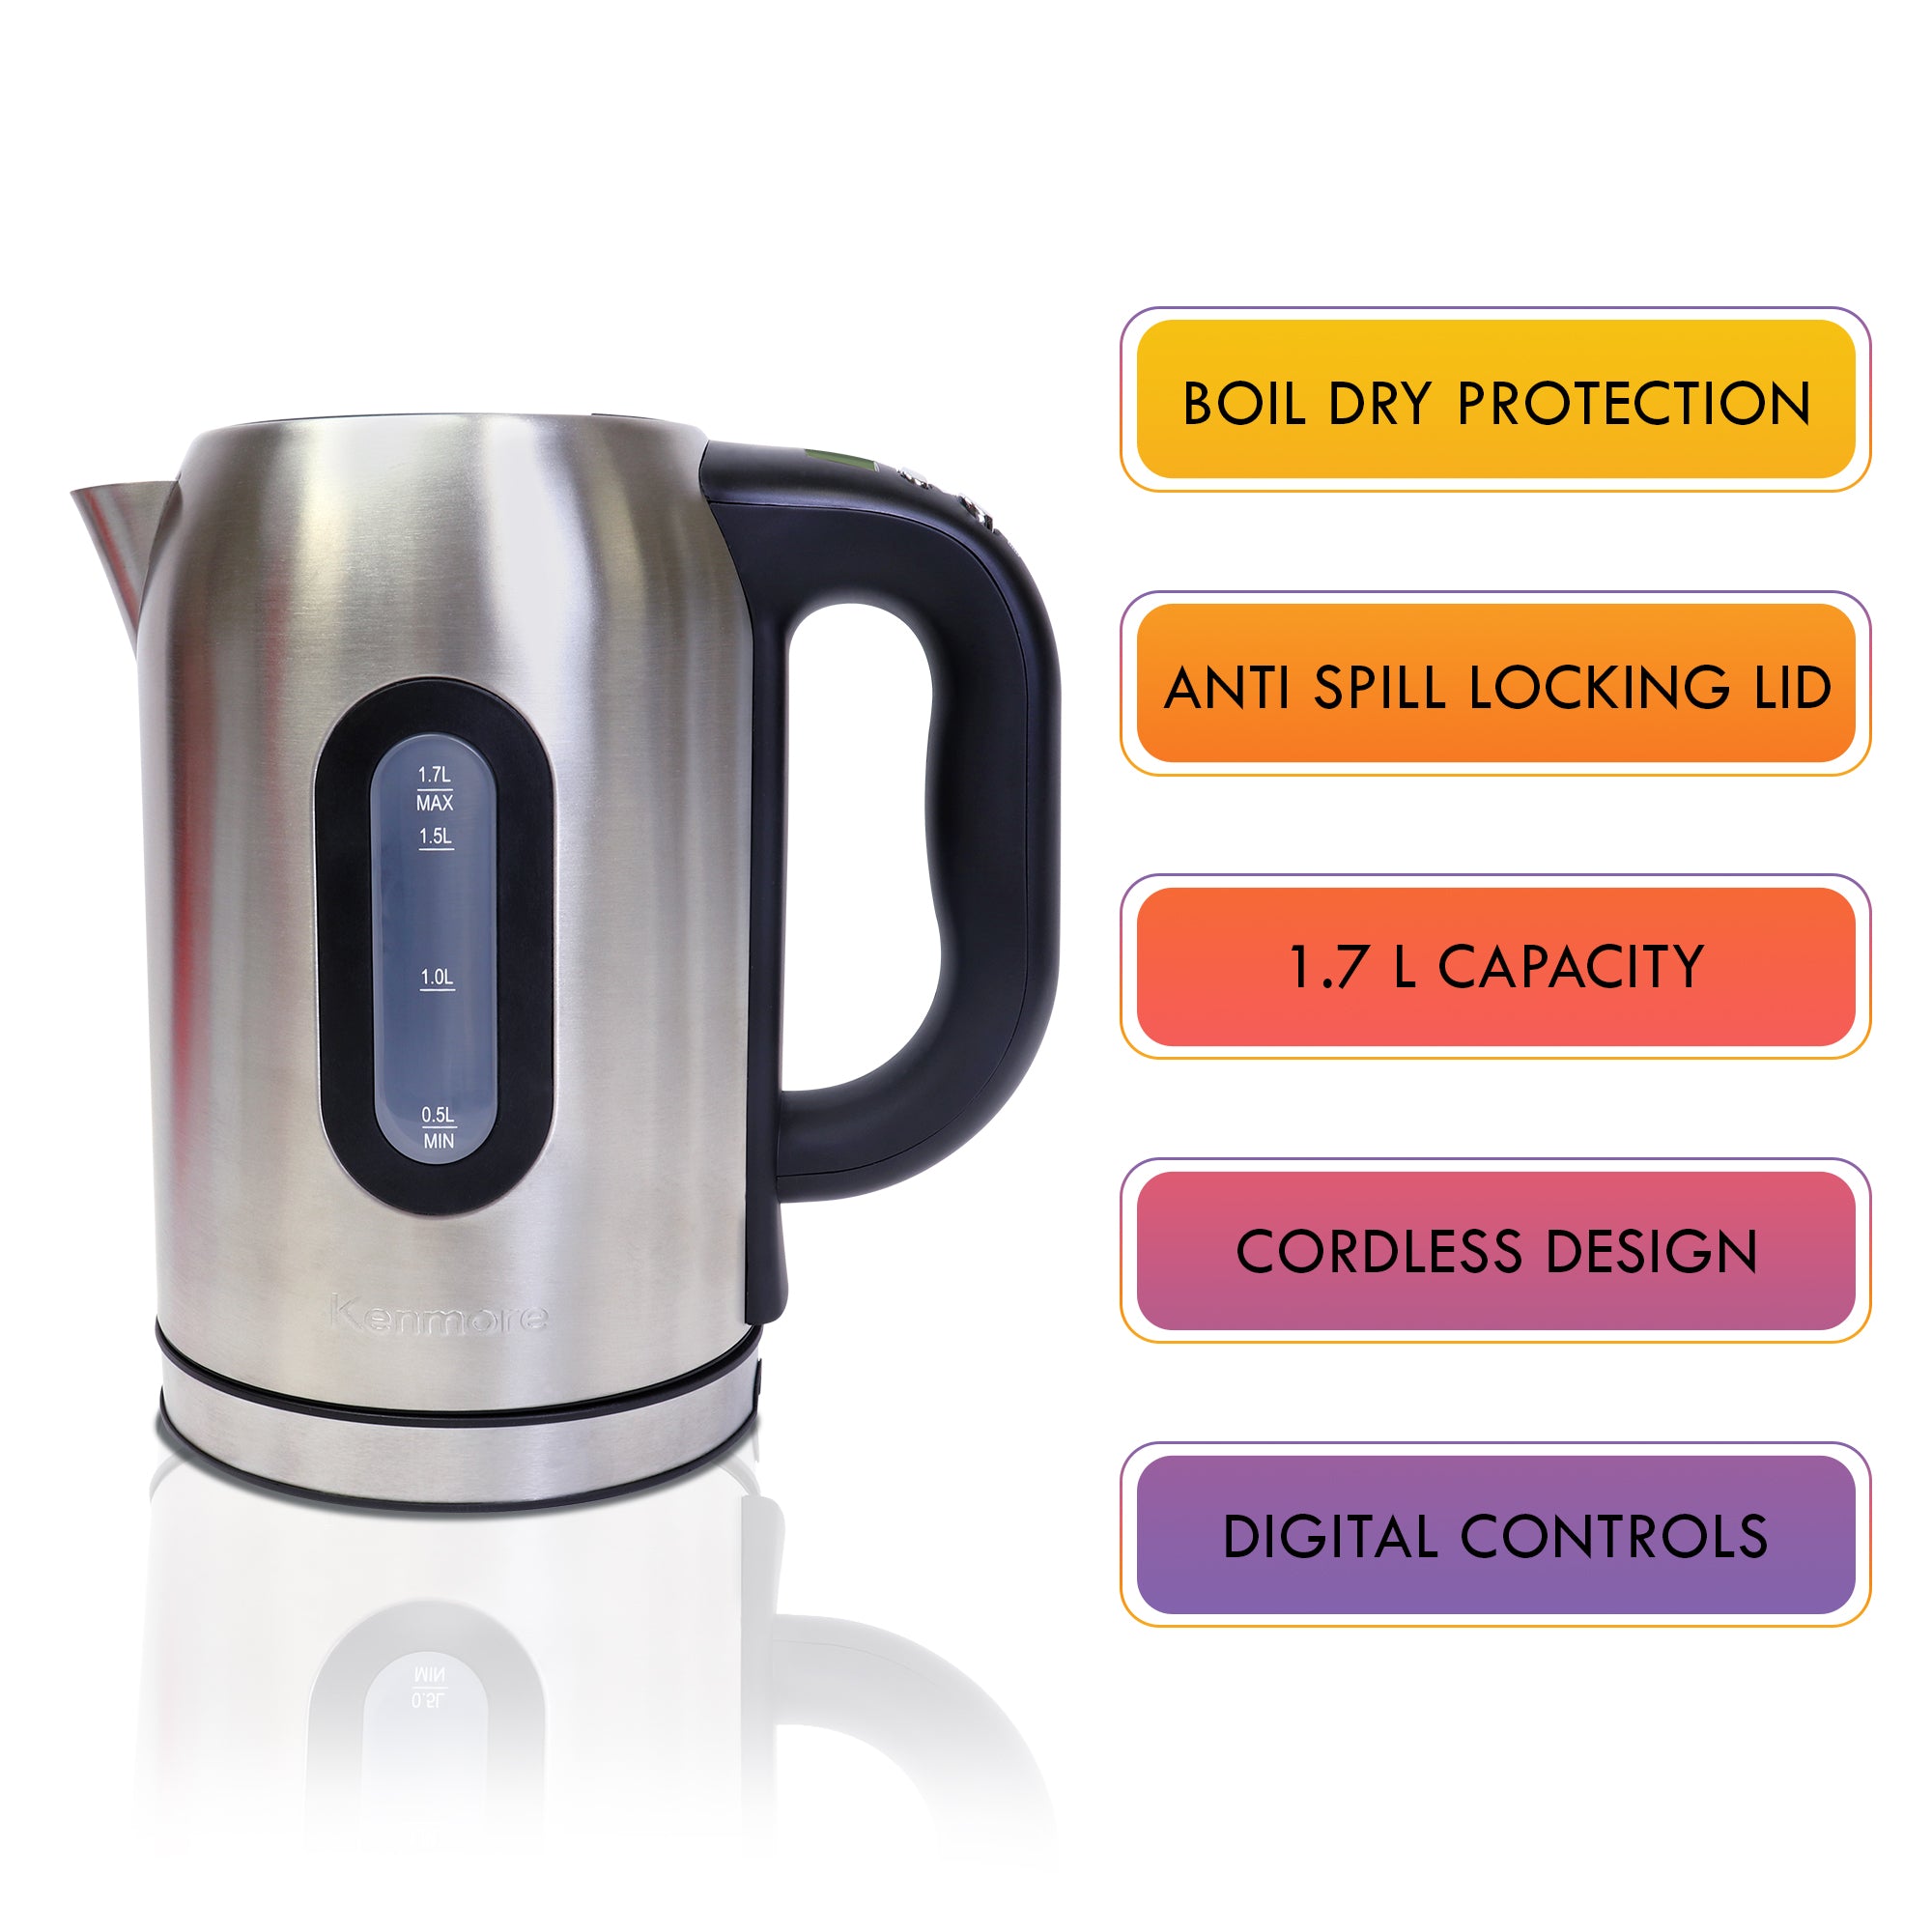 Product shot of Kenmore programmable digital cordless kettle on a white background on the left with a list of features to the right: boil dry protection; anti spill locking lid; 1.7L capacity; cordless design; digital controls